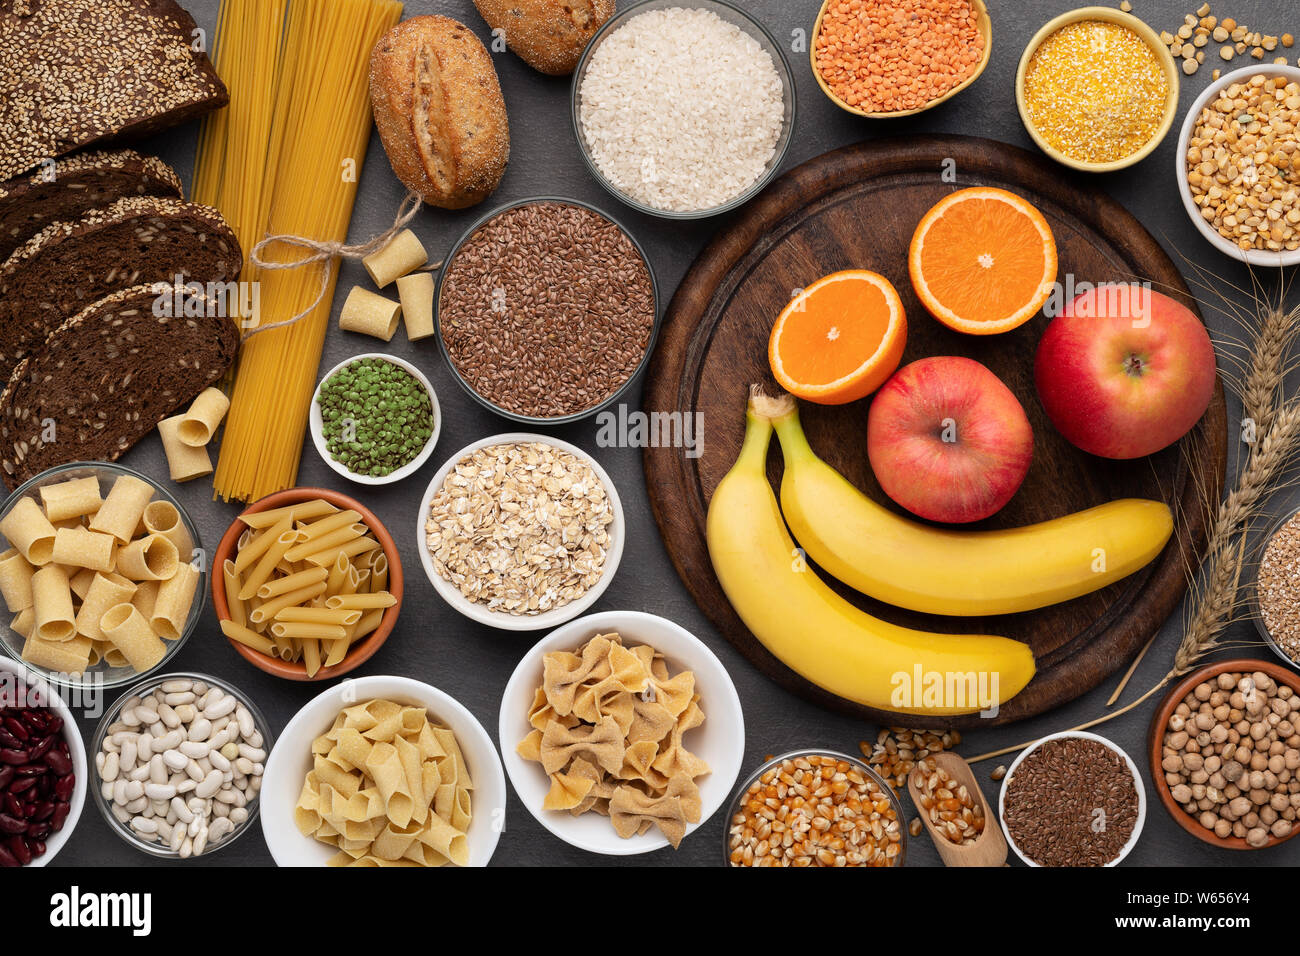 Gluten free grains, bread, pasta and fruits on wood Stock Photo